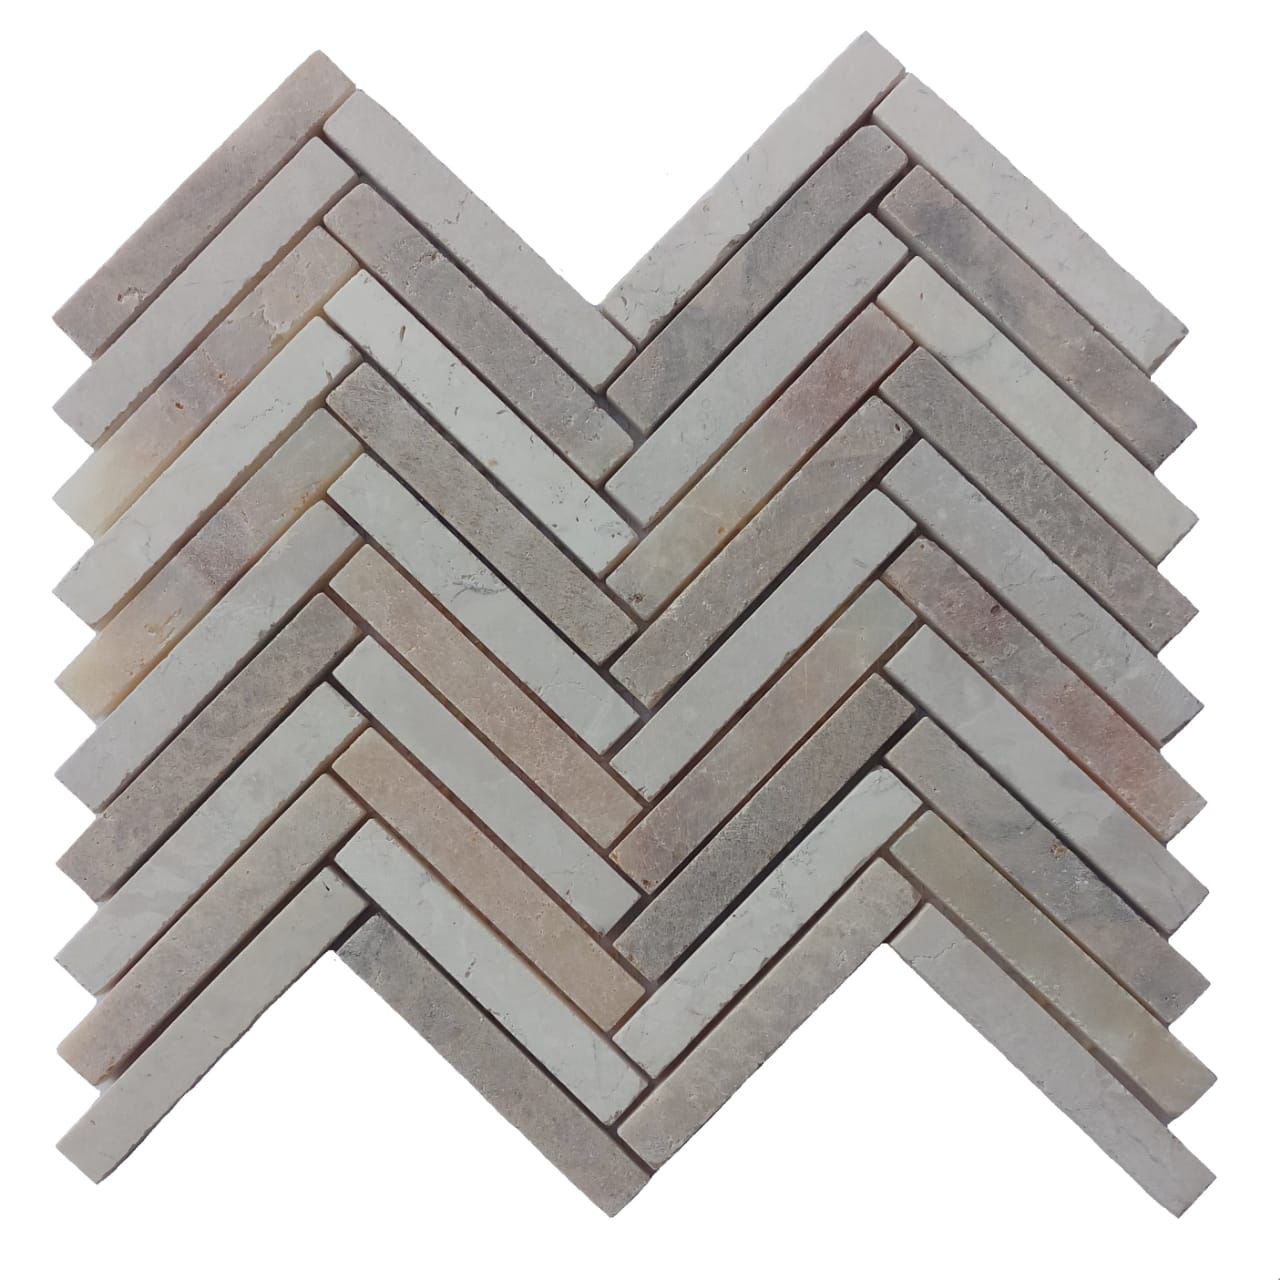 Mixed-White-And-Onyx-And-Sunset-Small-Chevron-Mosaic-Tile